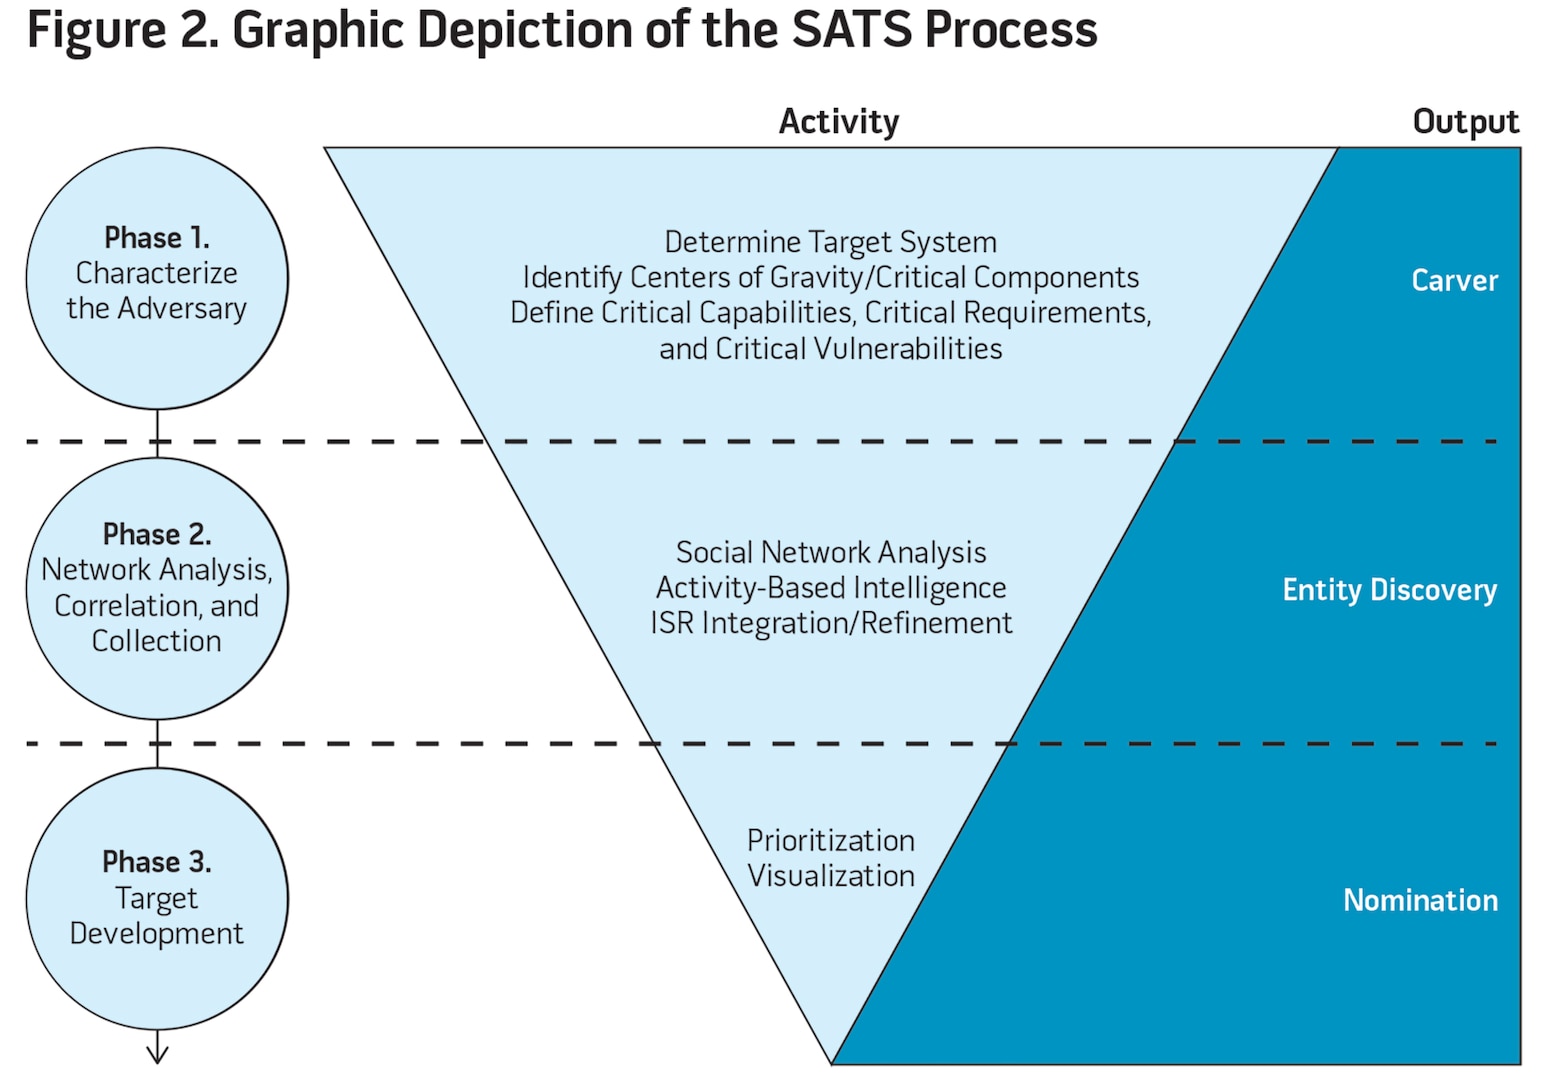 Figure 2. Graphic Depiction of the SATS Process